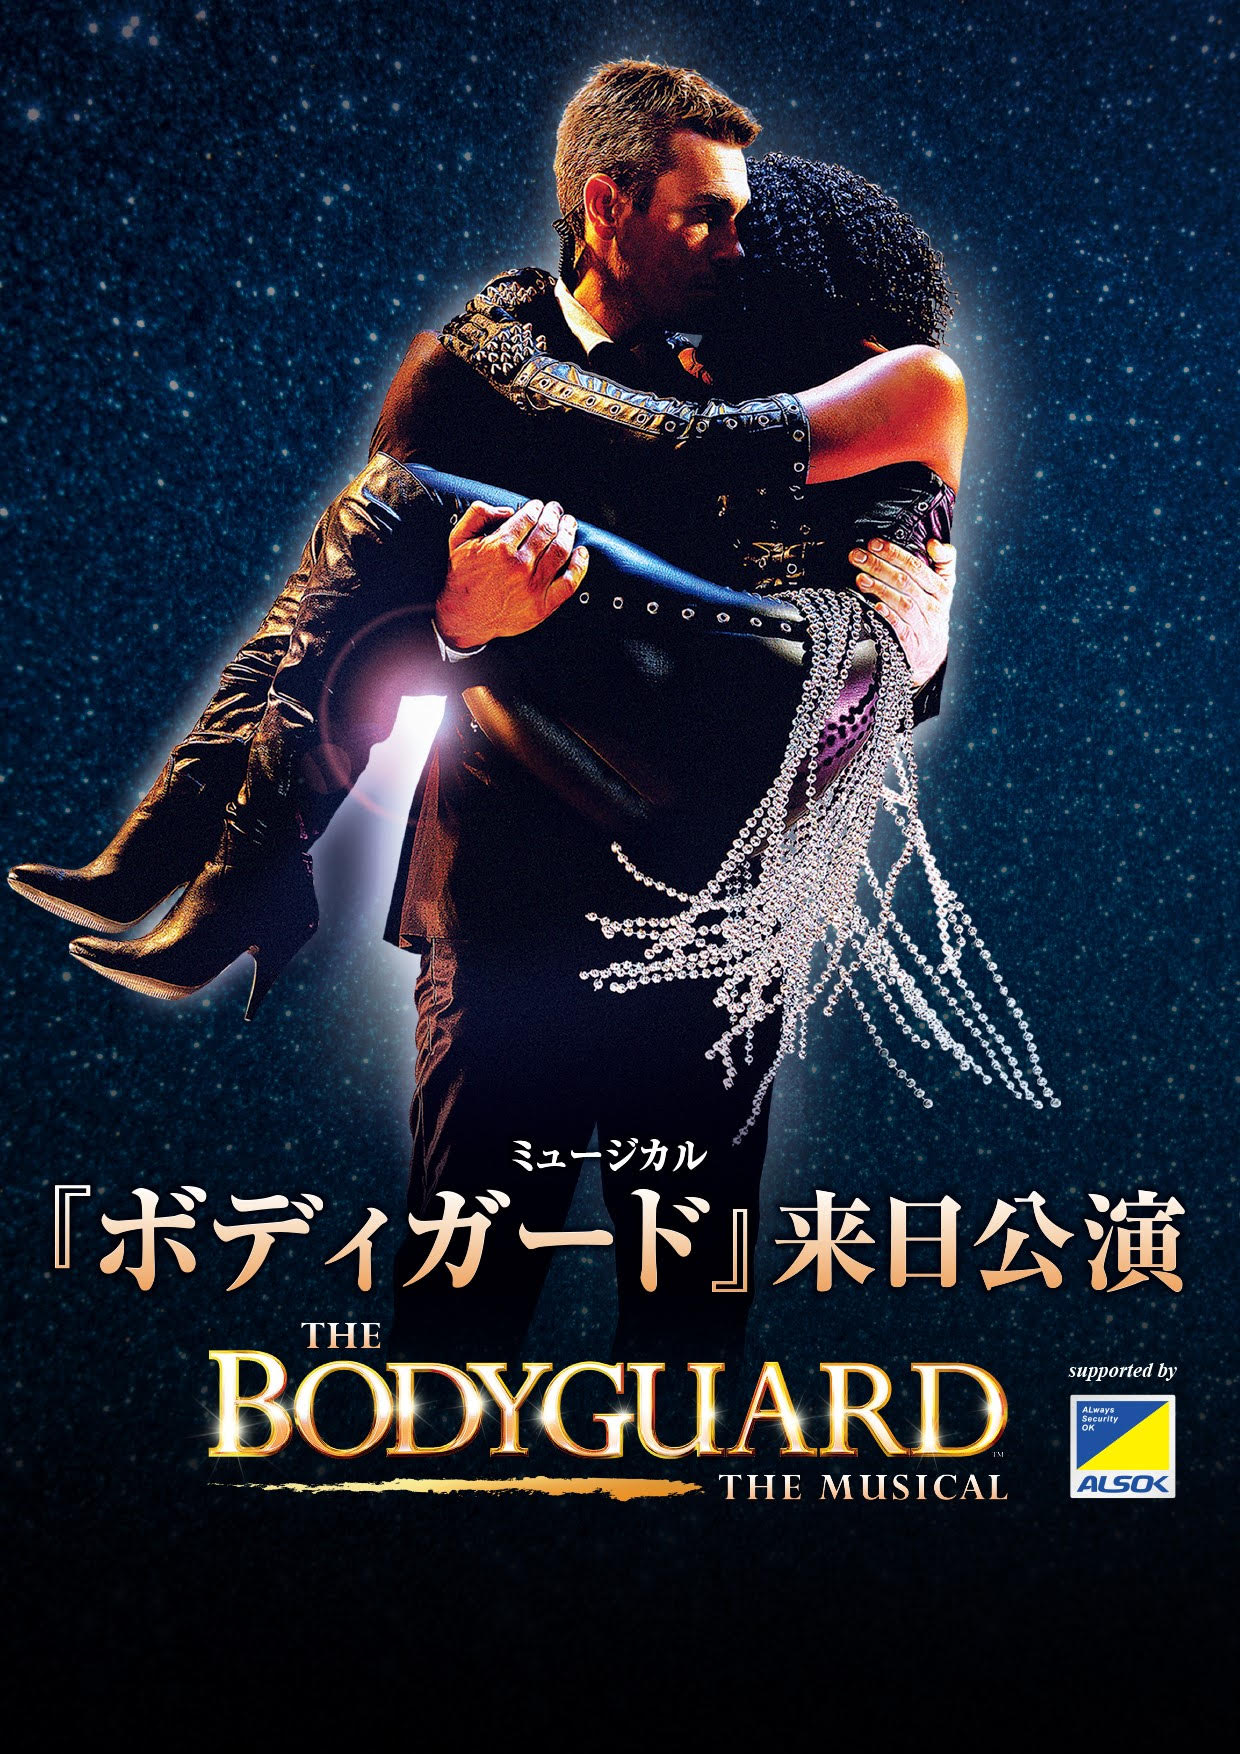 The Bodyguard The Musical UK Tour in Japan